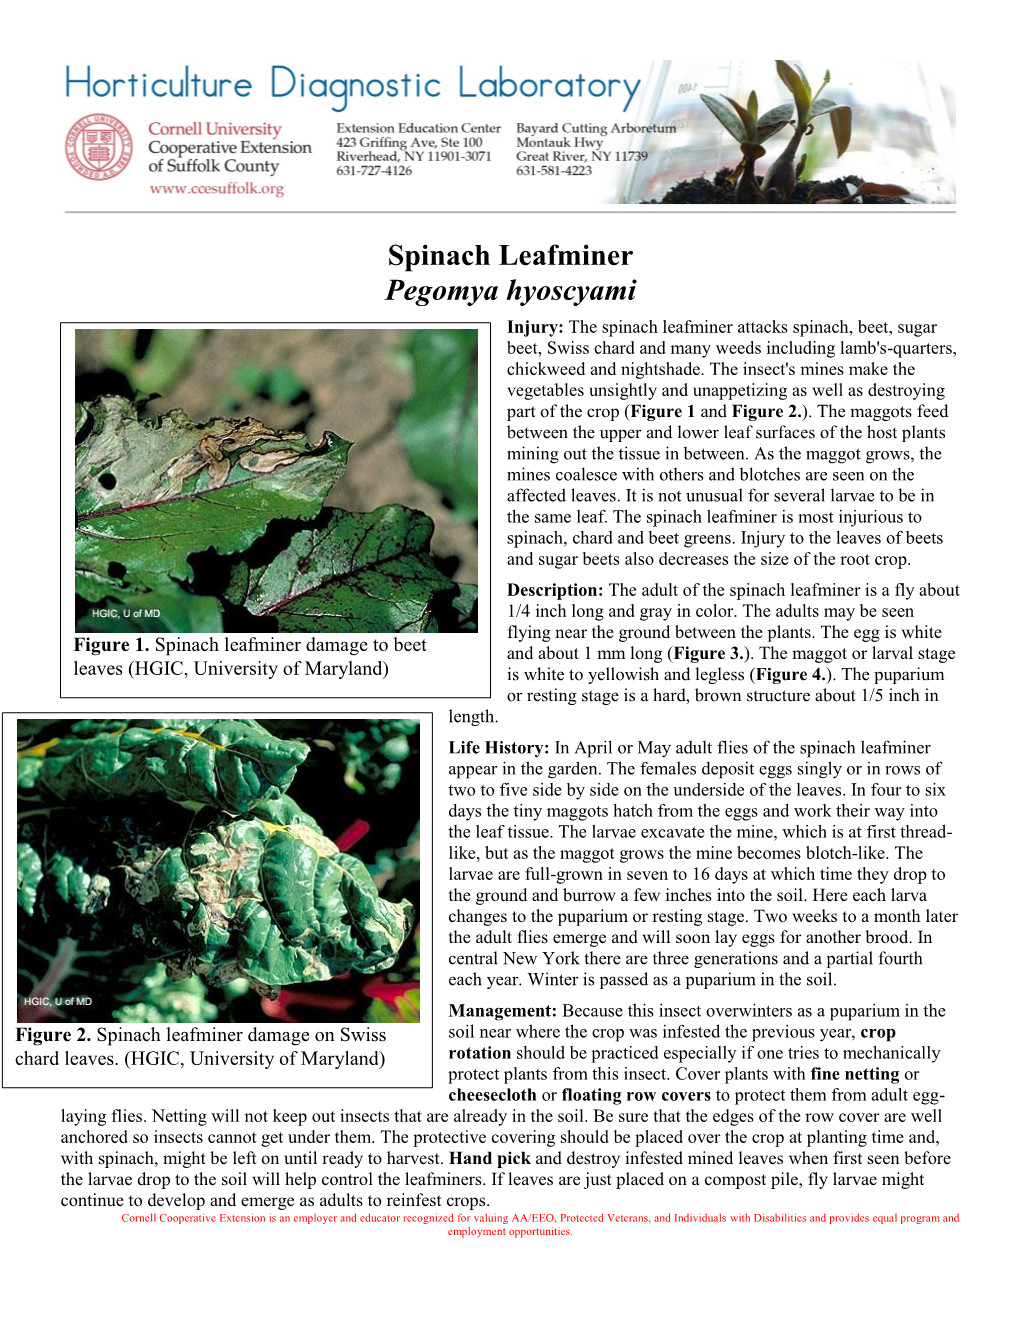 Spinach Leafminer